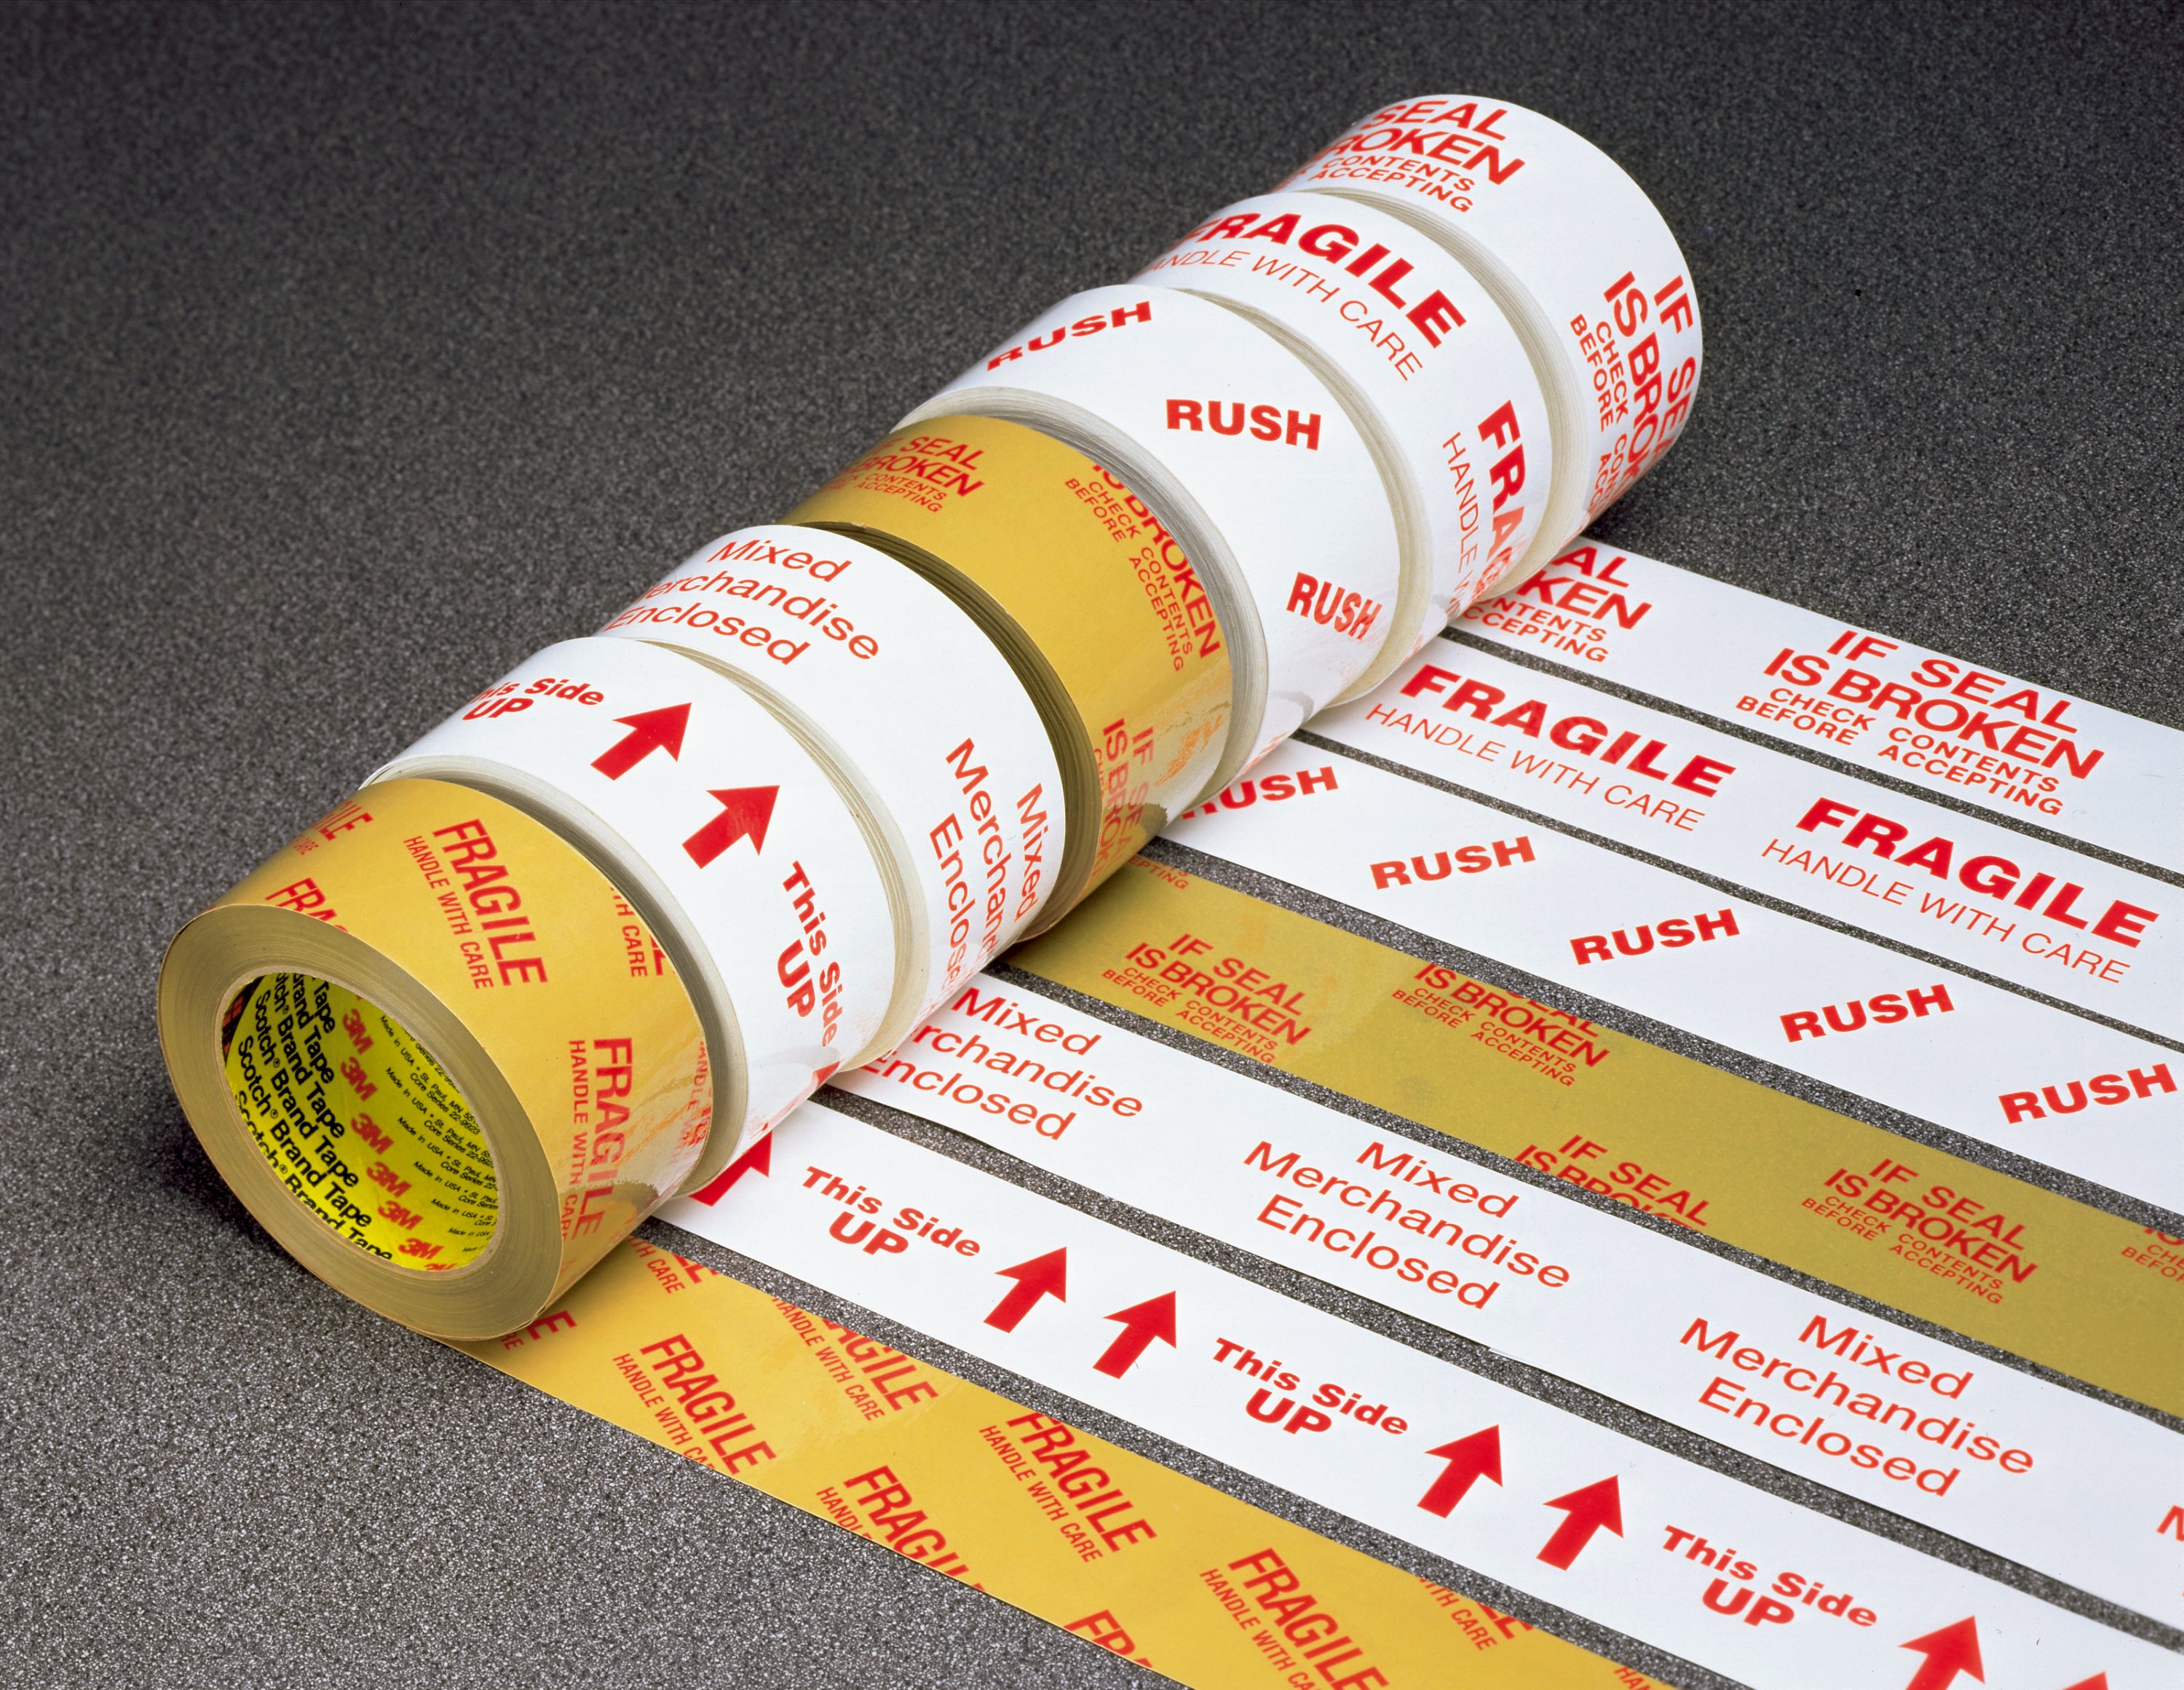 Scotch® Printed Message Box Sealing Tapes are available with a variety of pre-printed messages